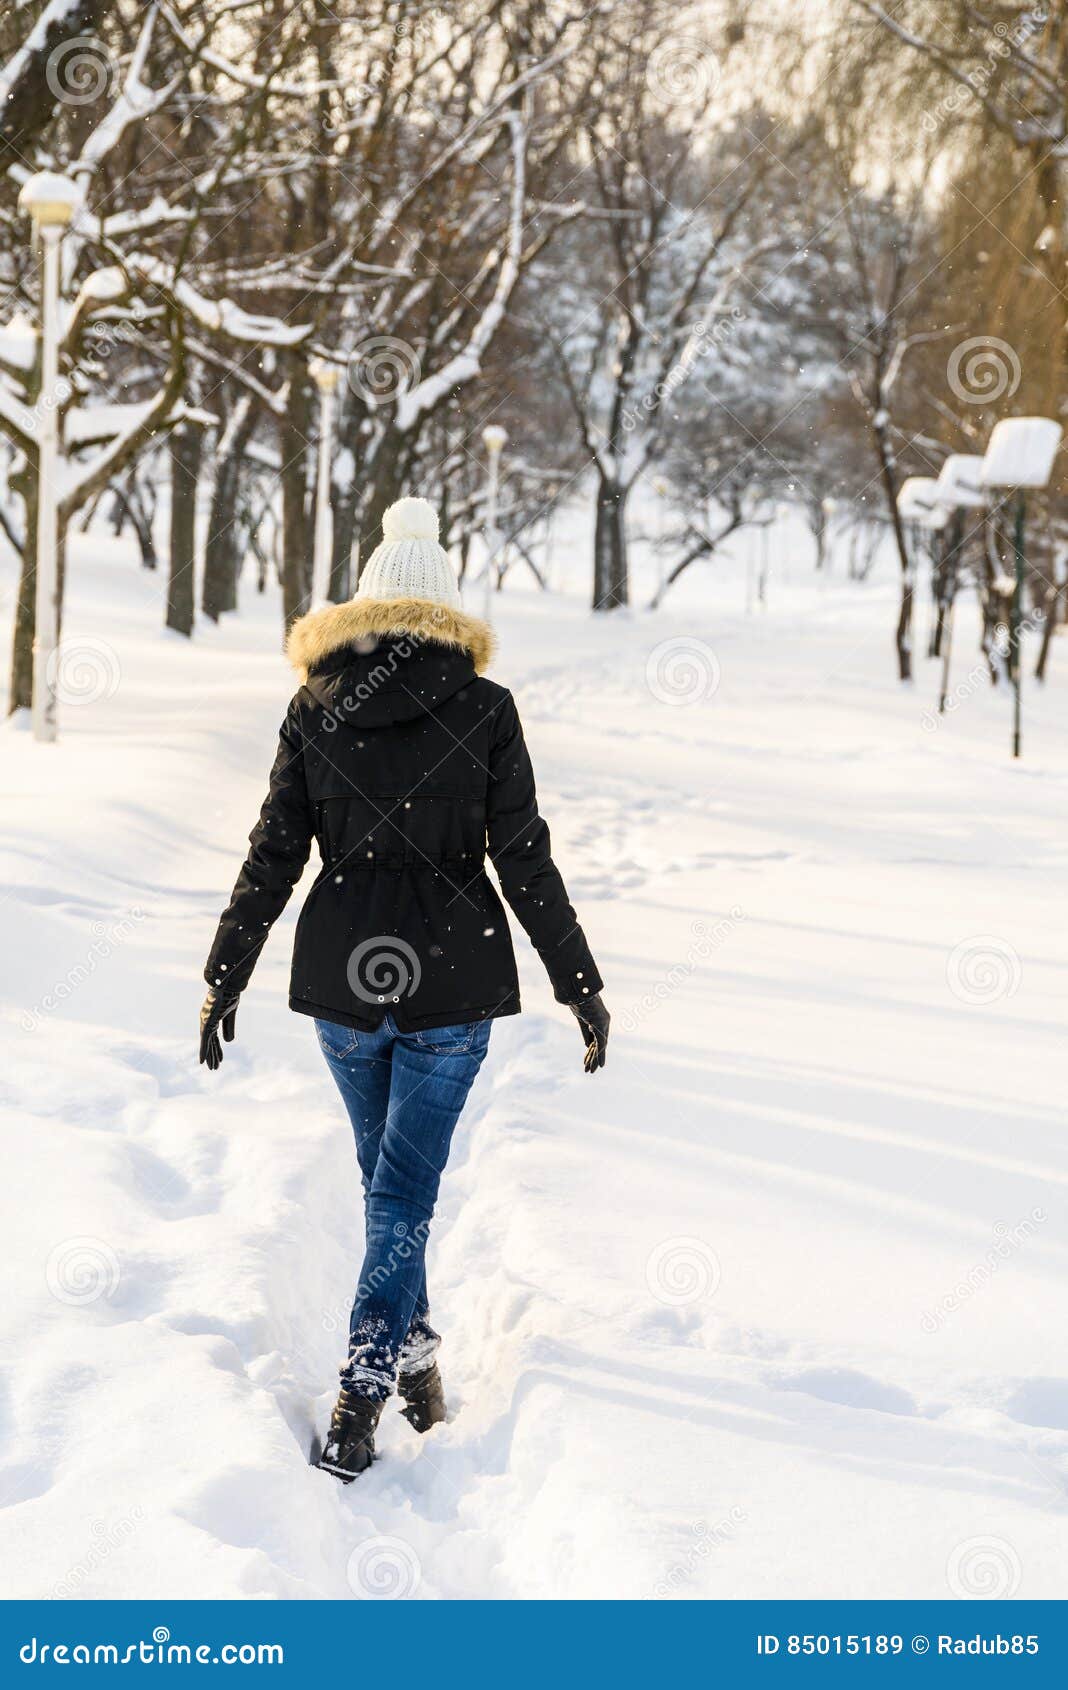 Girl Walking in Winter Snow Park Stock Image - Image of background ...